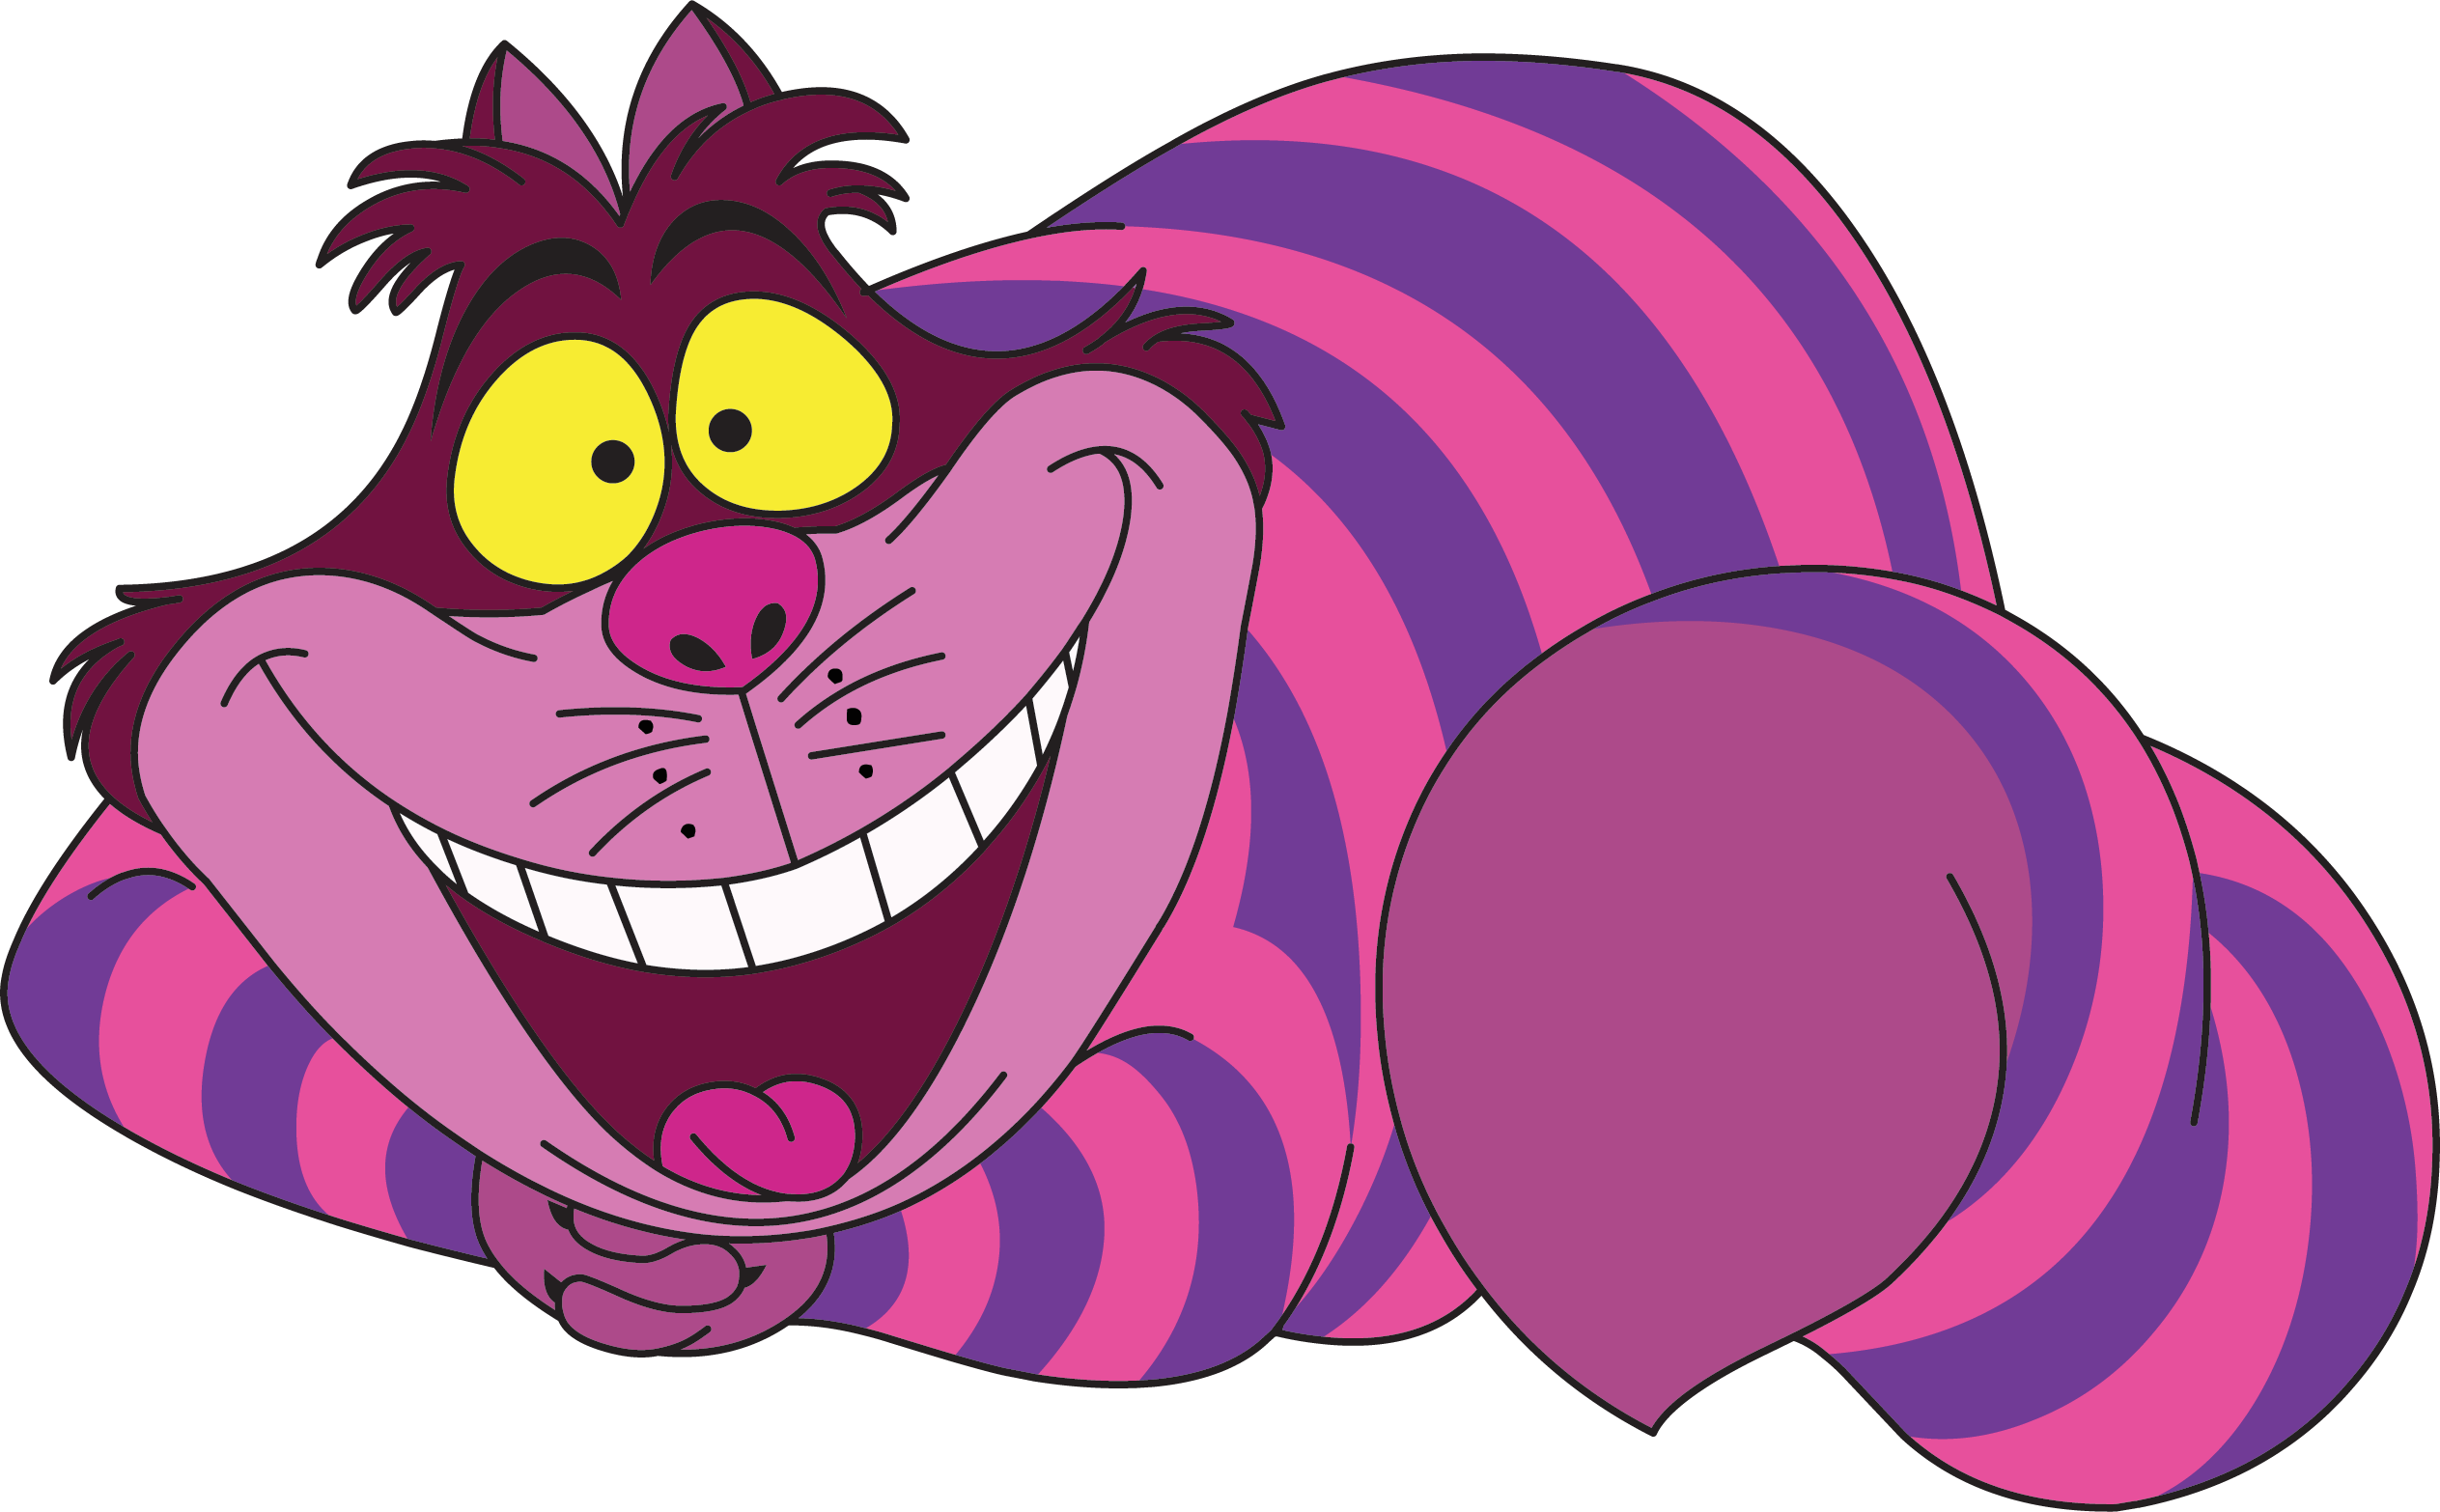 Do Cheshire Cats Really Smile